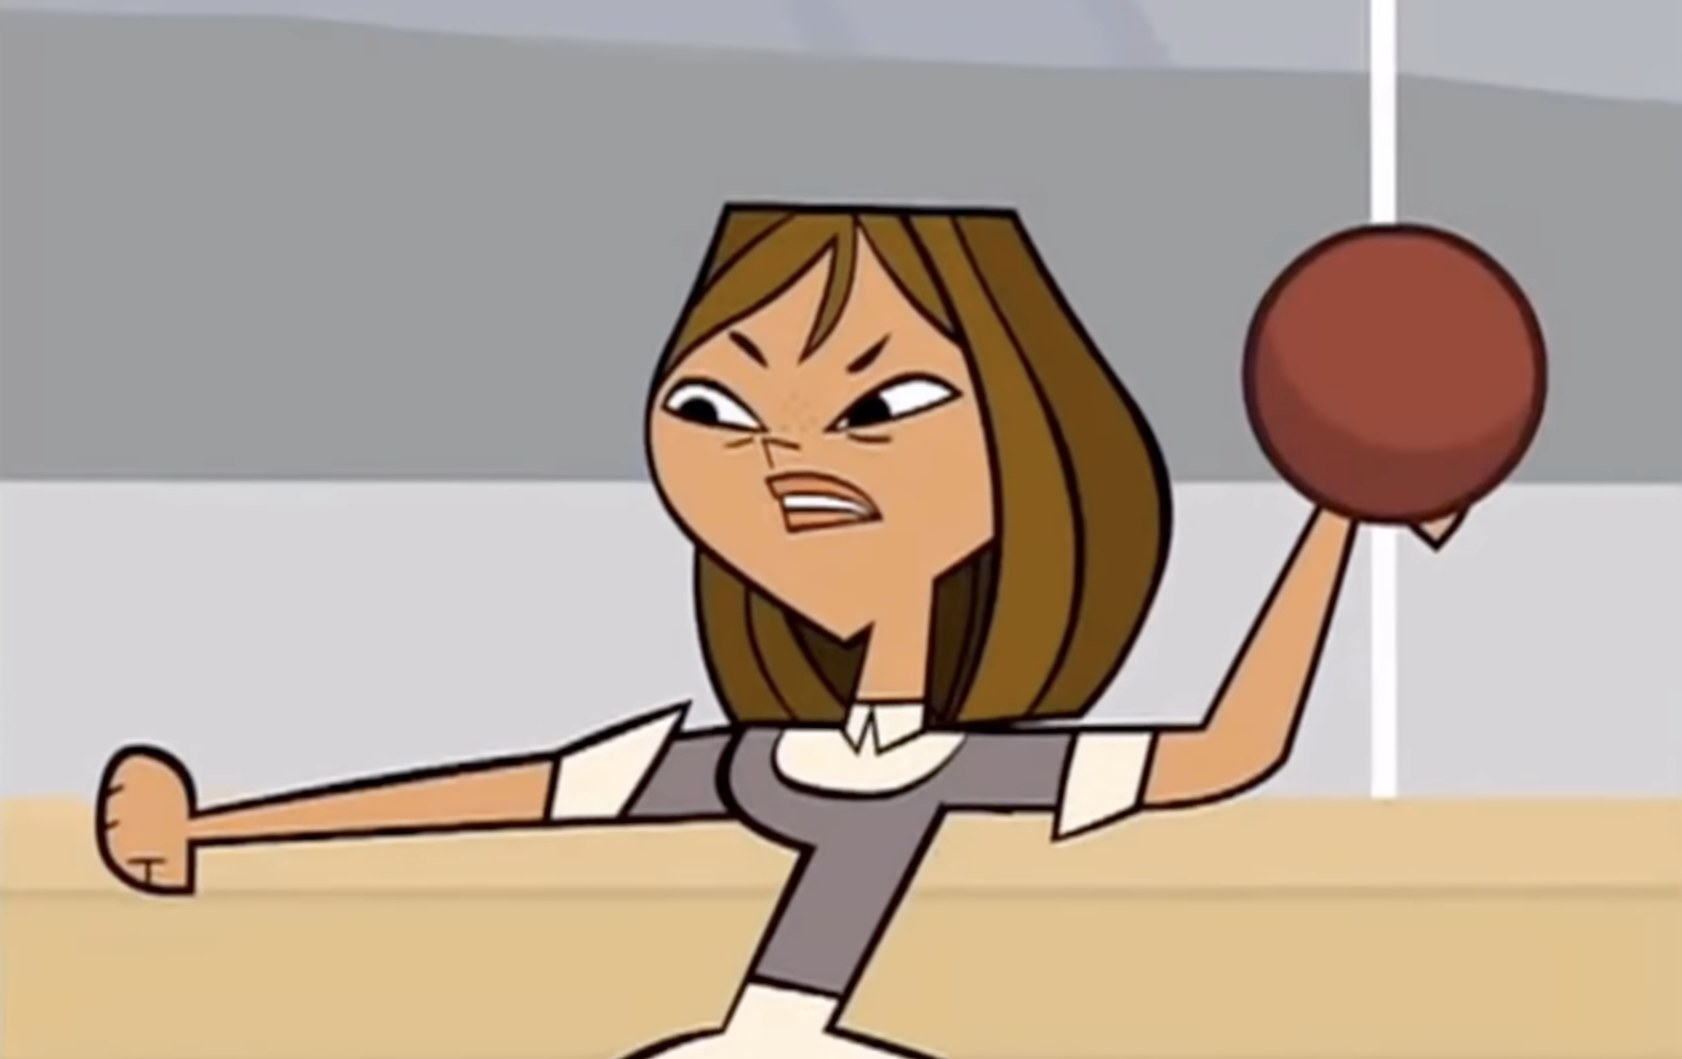 Courtney getting ready to throw a dodgeball in Total Drama Island